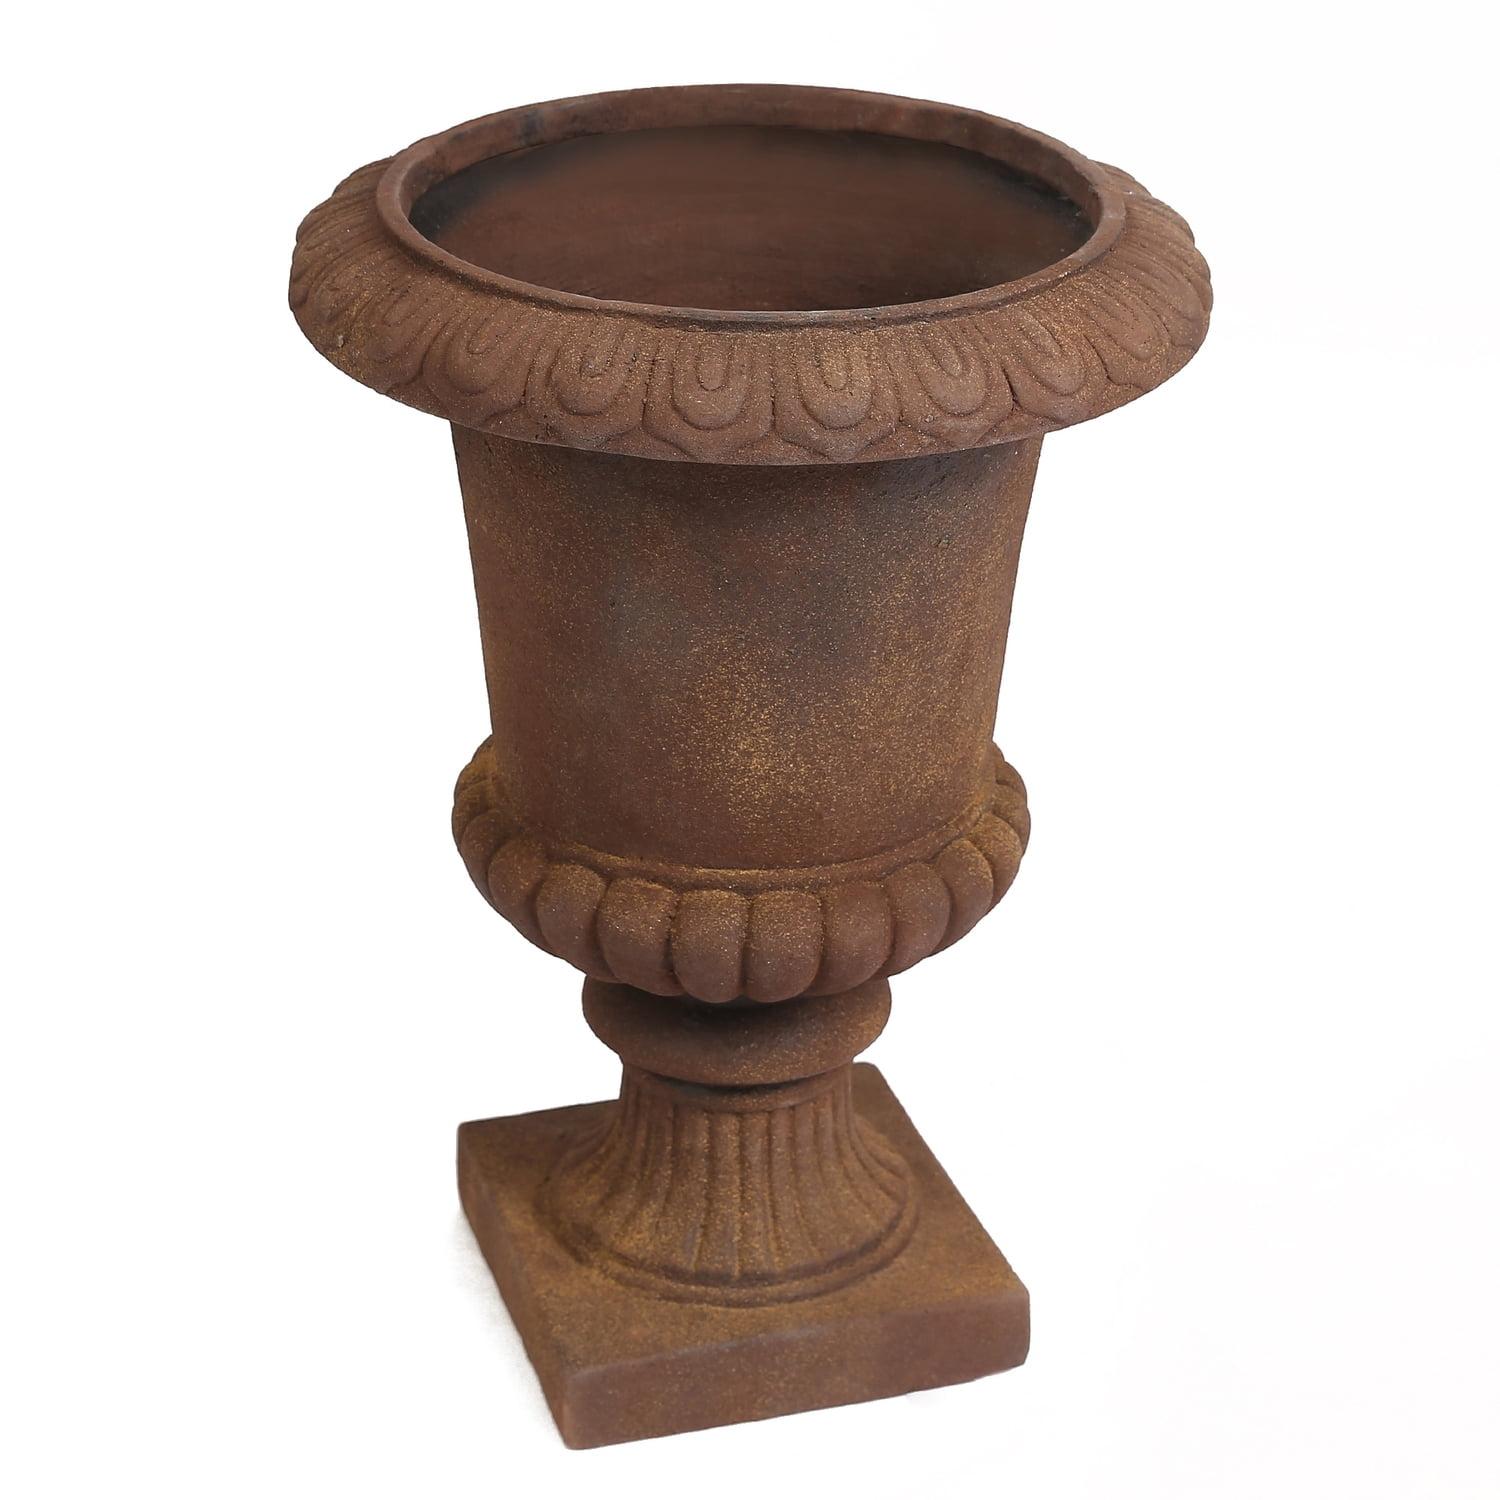 Rustic Brown 25" MgO Urn Planter for Indoor/Outdoor Decor